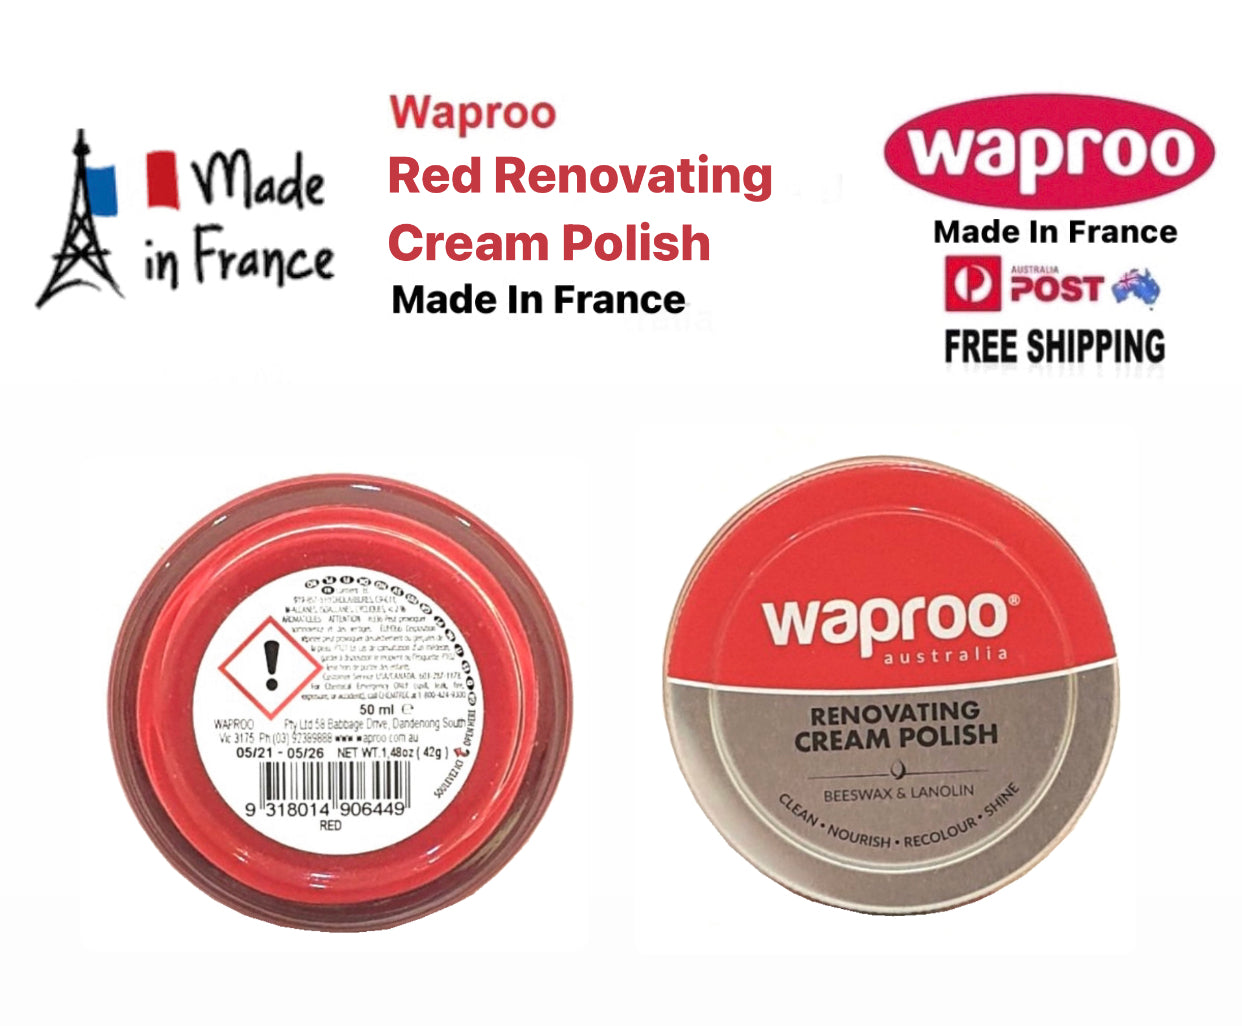 Waproo Red Renovating Cream Polish 42g Made In France